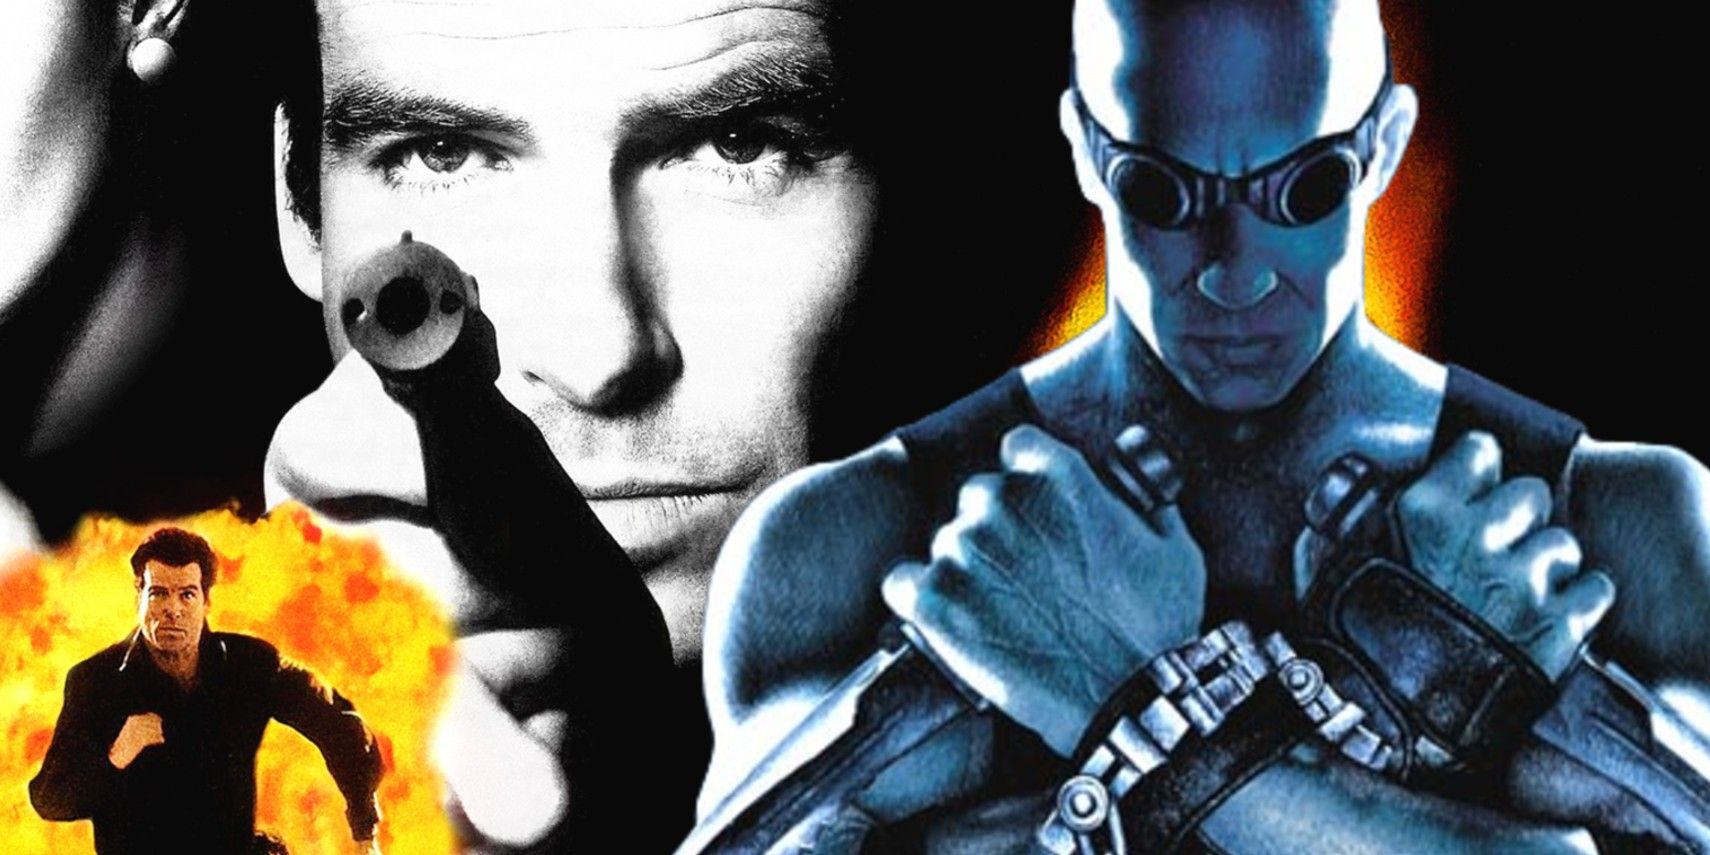 GoldenEye And Other Games More Famous Than The Movies They Were Based On